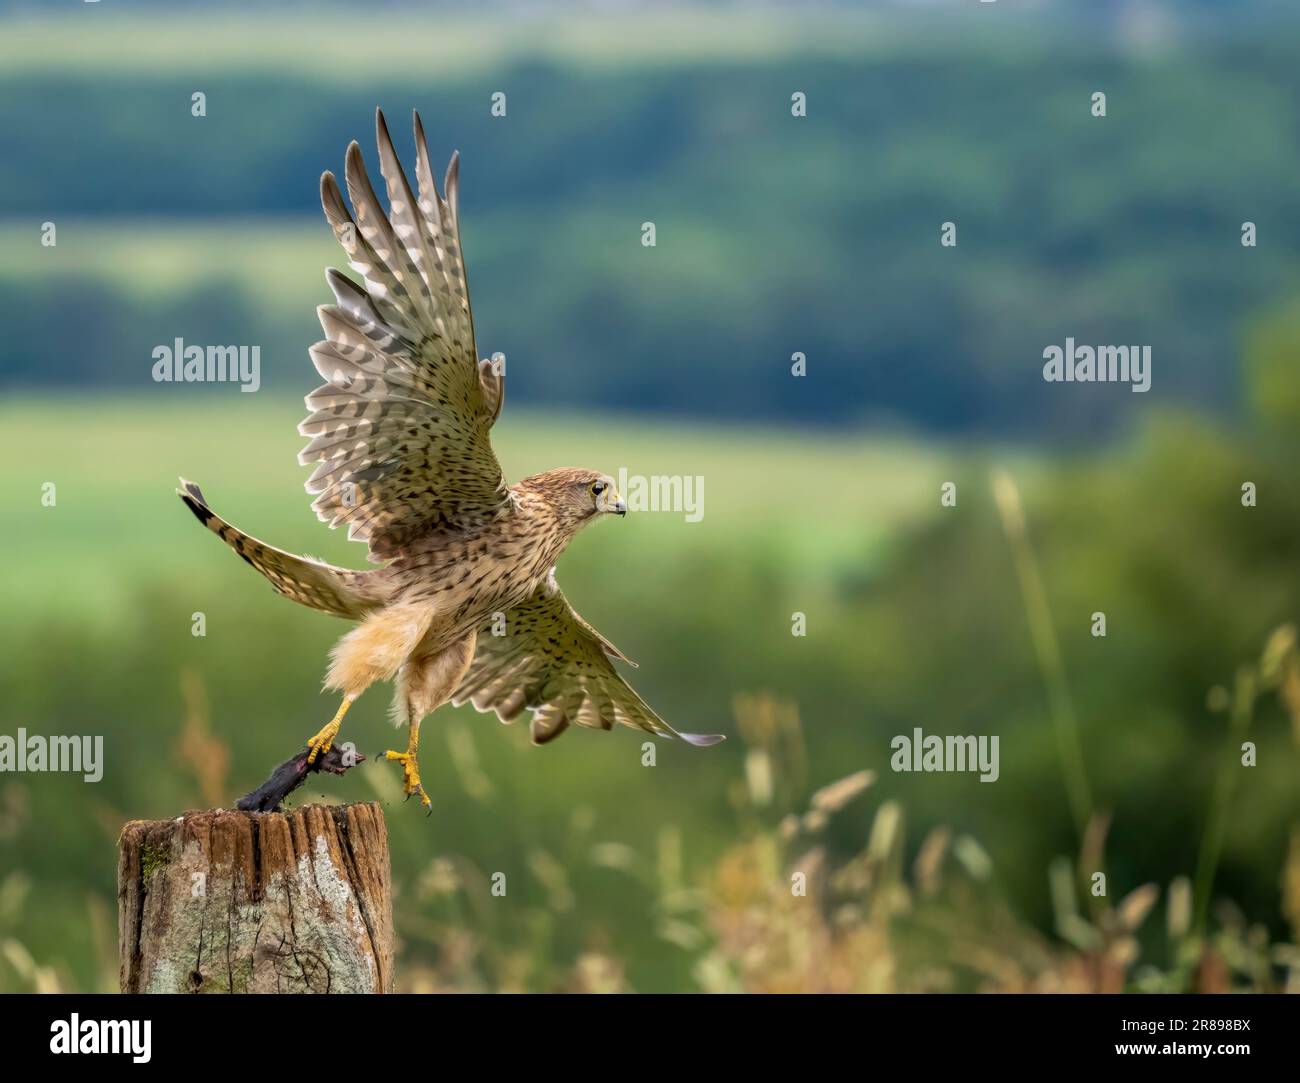 A beautiful female Kestrel, (Falco tinnunculus), takes flight from an old wooden gate post, carrying a Field Mouse it has just caught Stock Photo